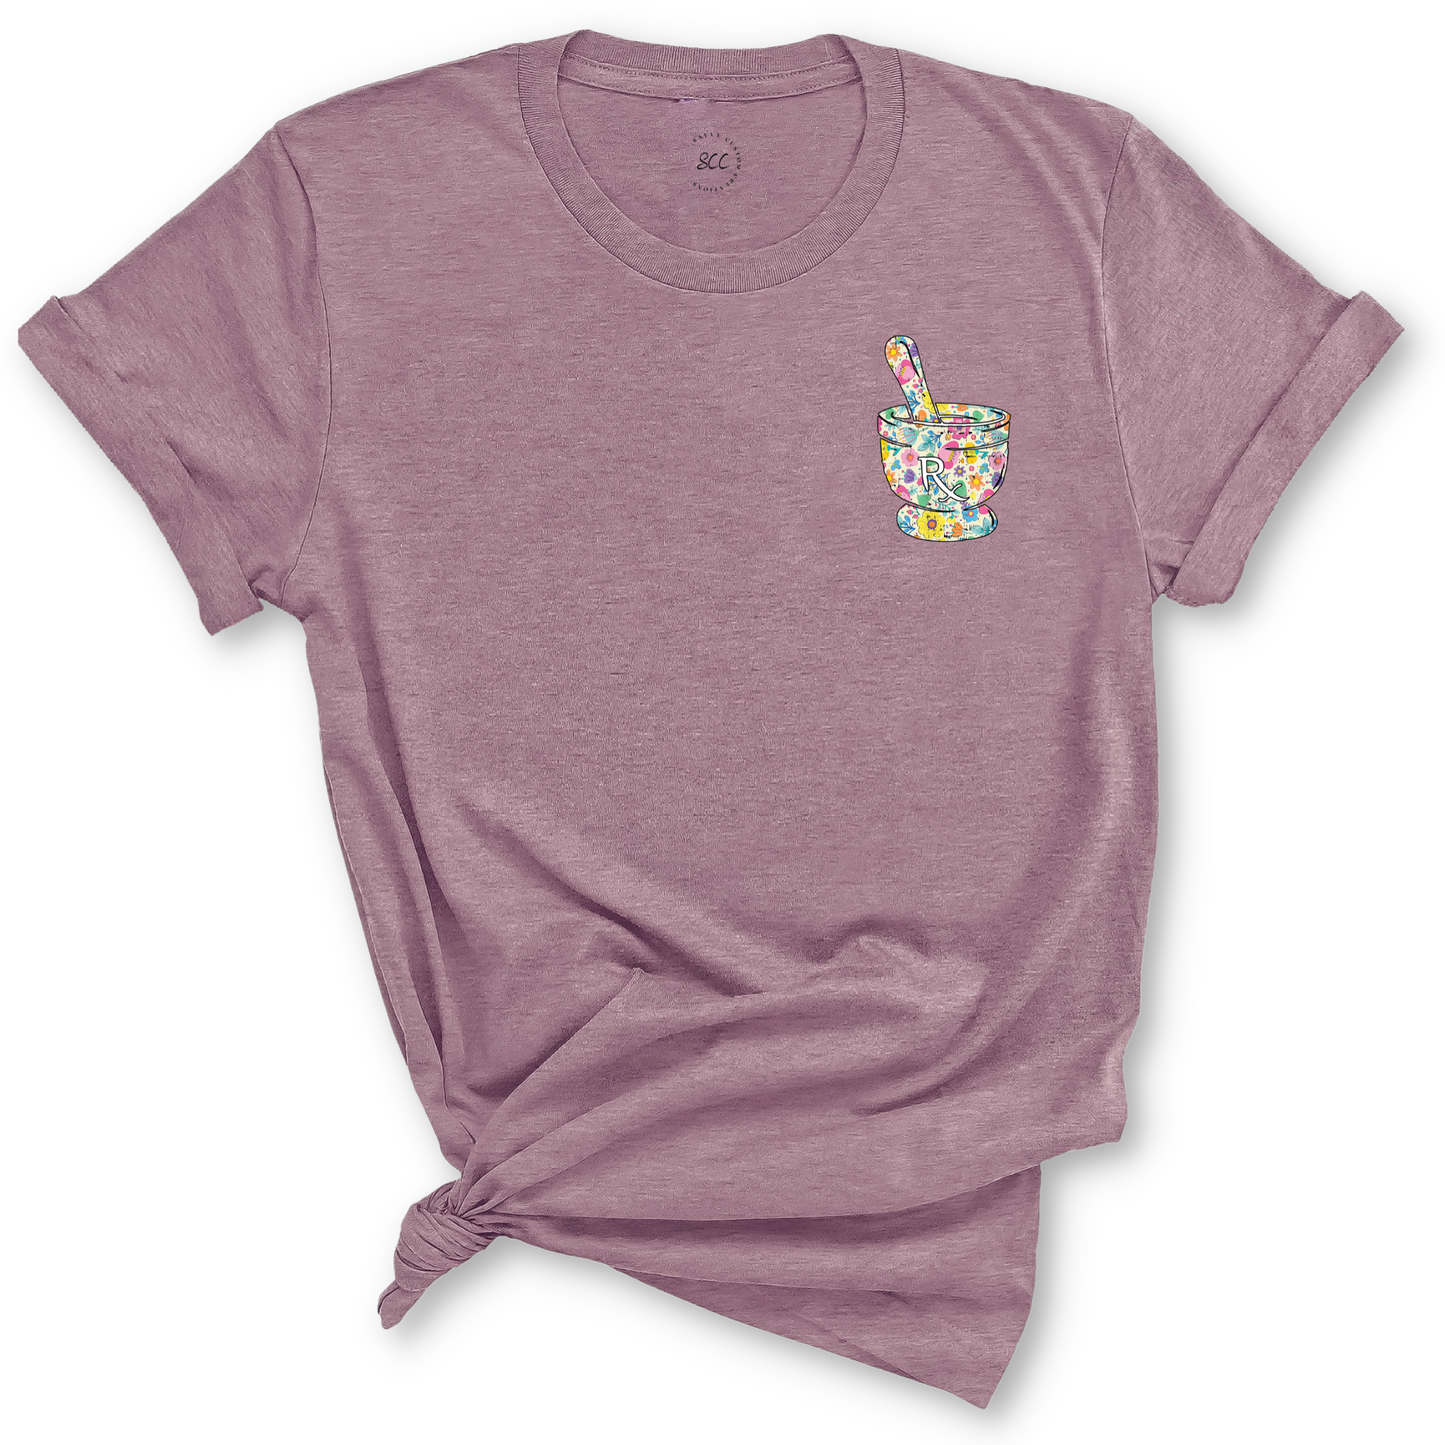 RX FLORAL MORTAR AND PESTLE - Unisex T-Shirt